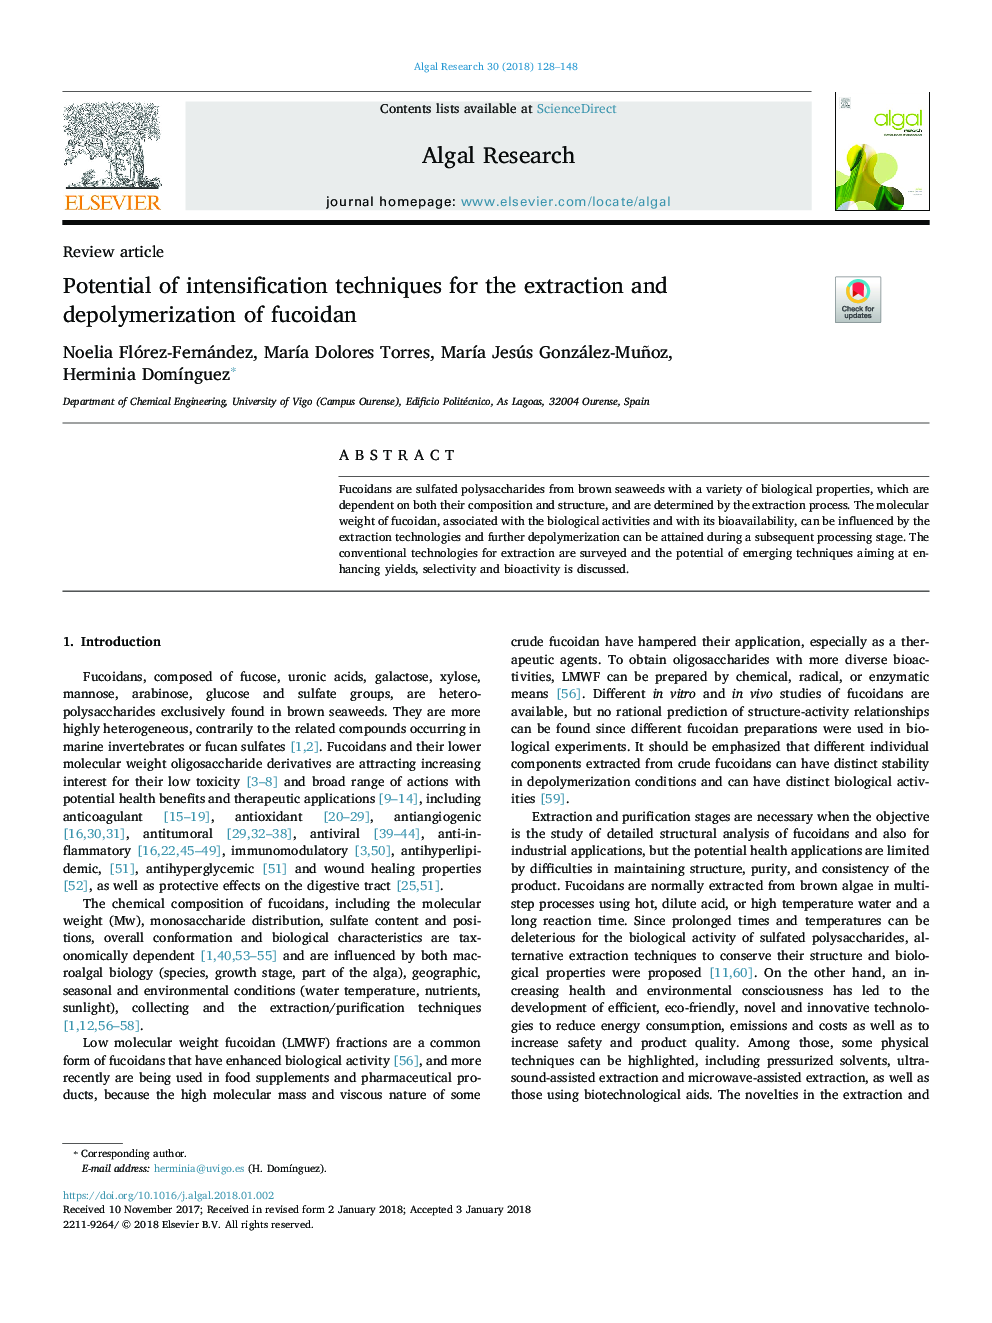 Potential of intensification techniques for the extraction and depolymerization of fucoidan